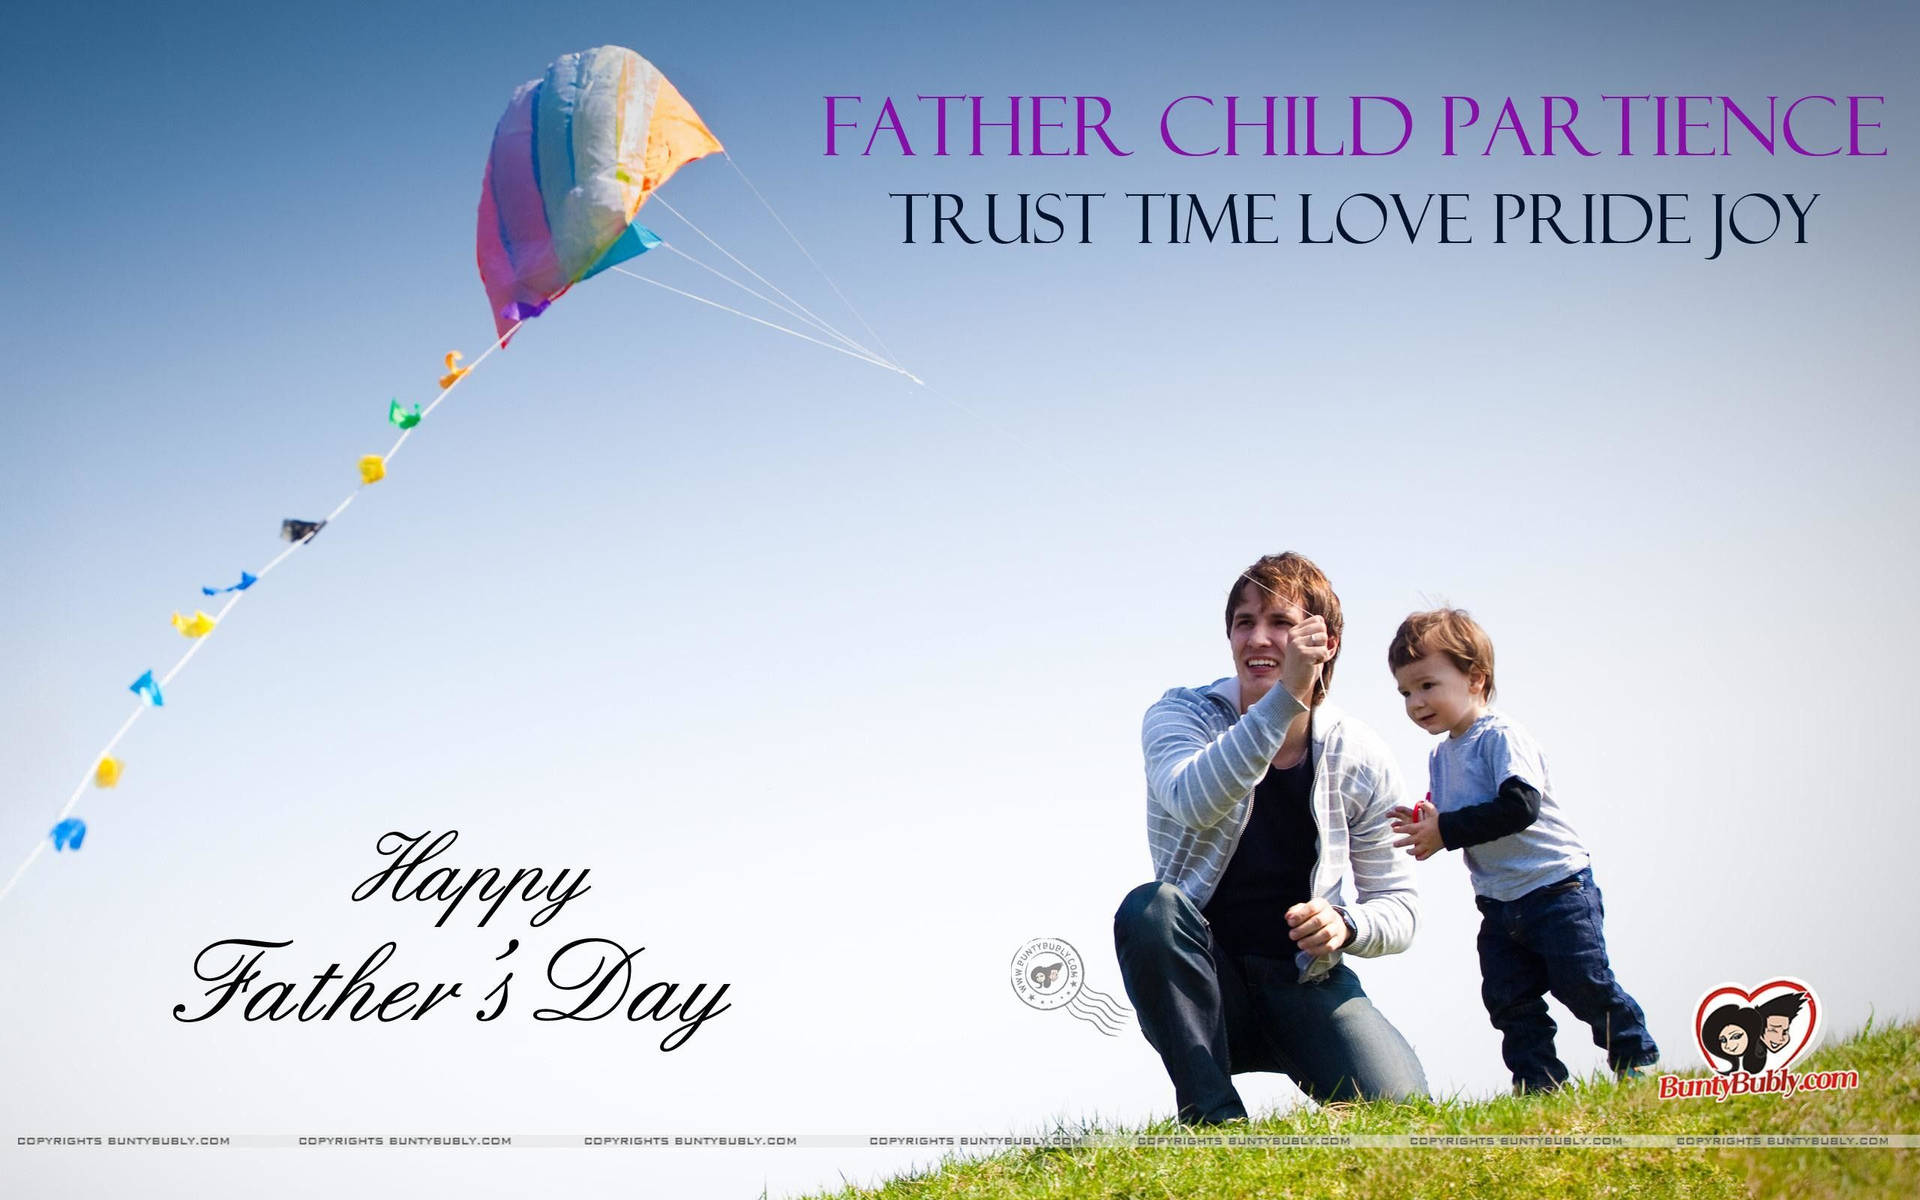 Celebrate Fathers Day with a fun outdoor activity Wallpaper